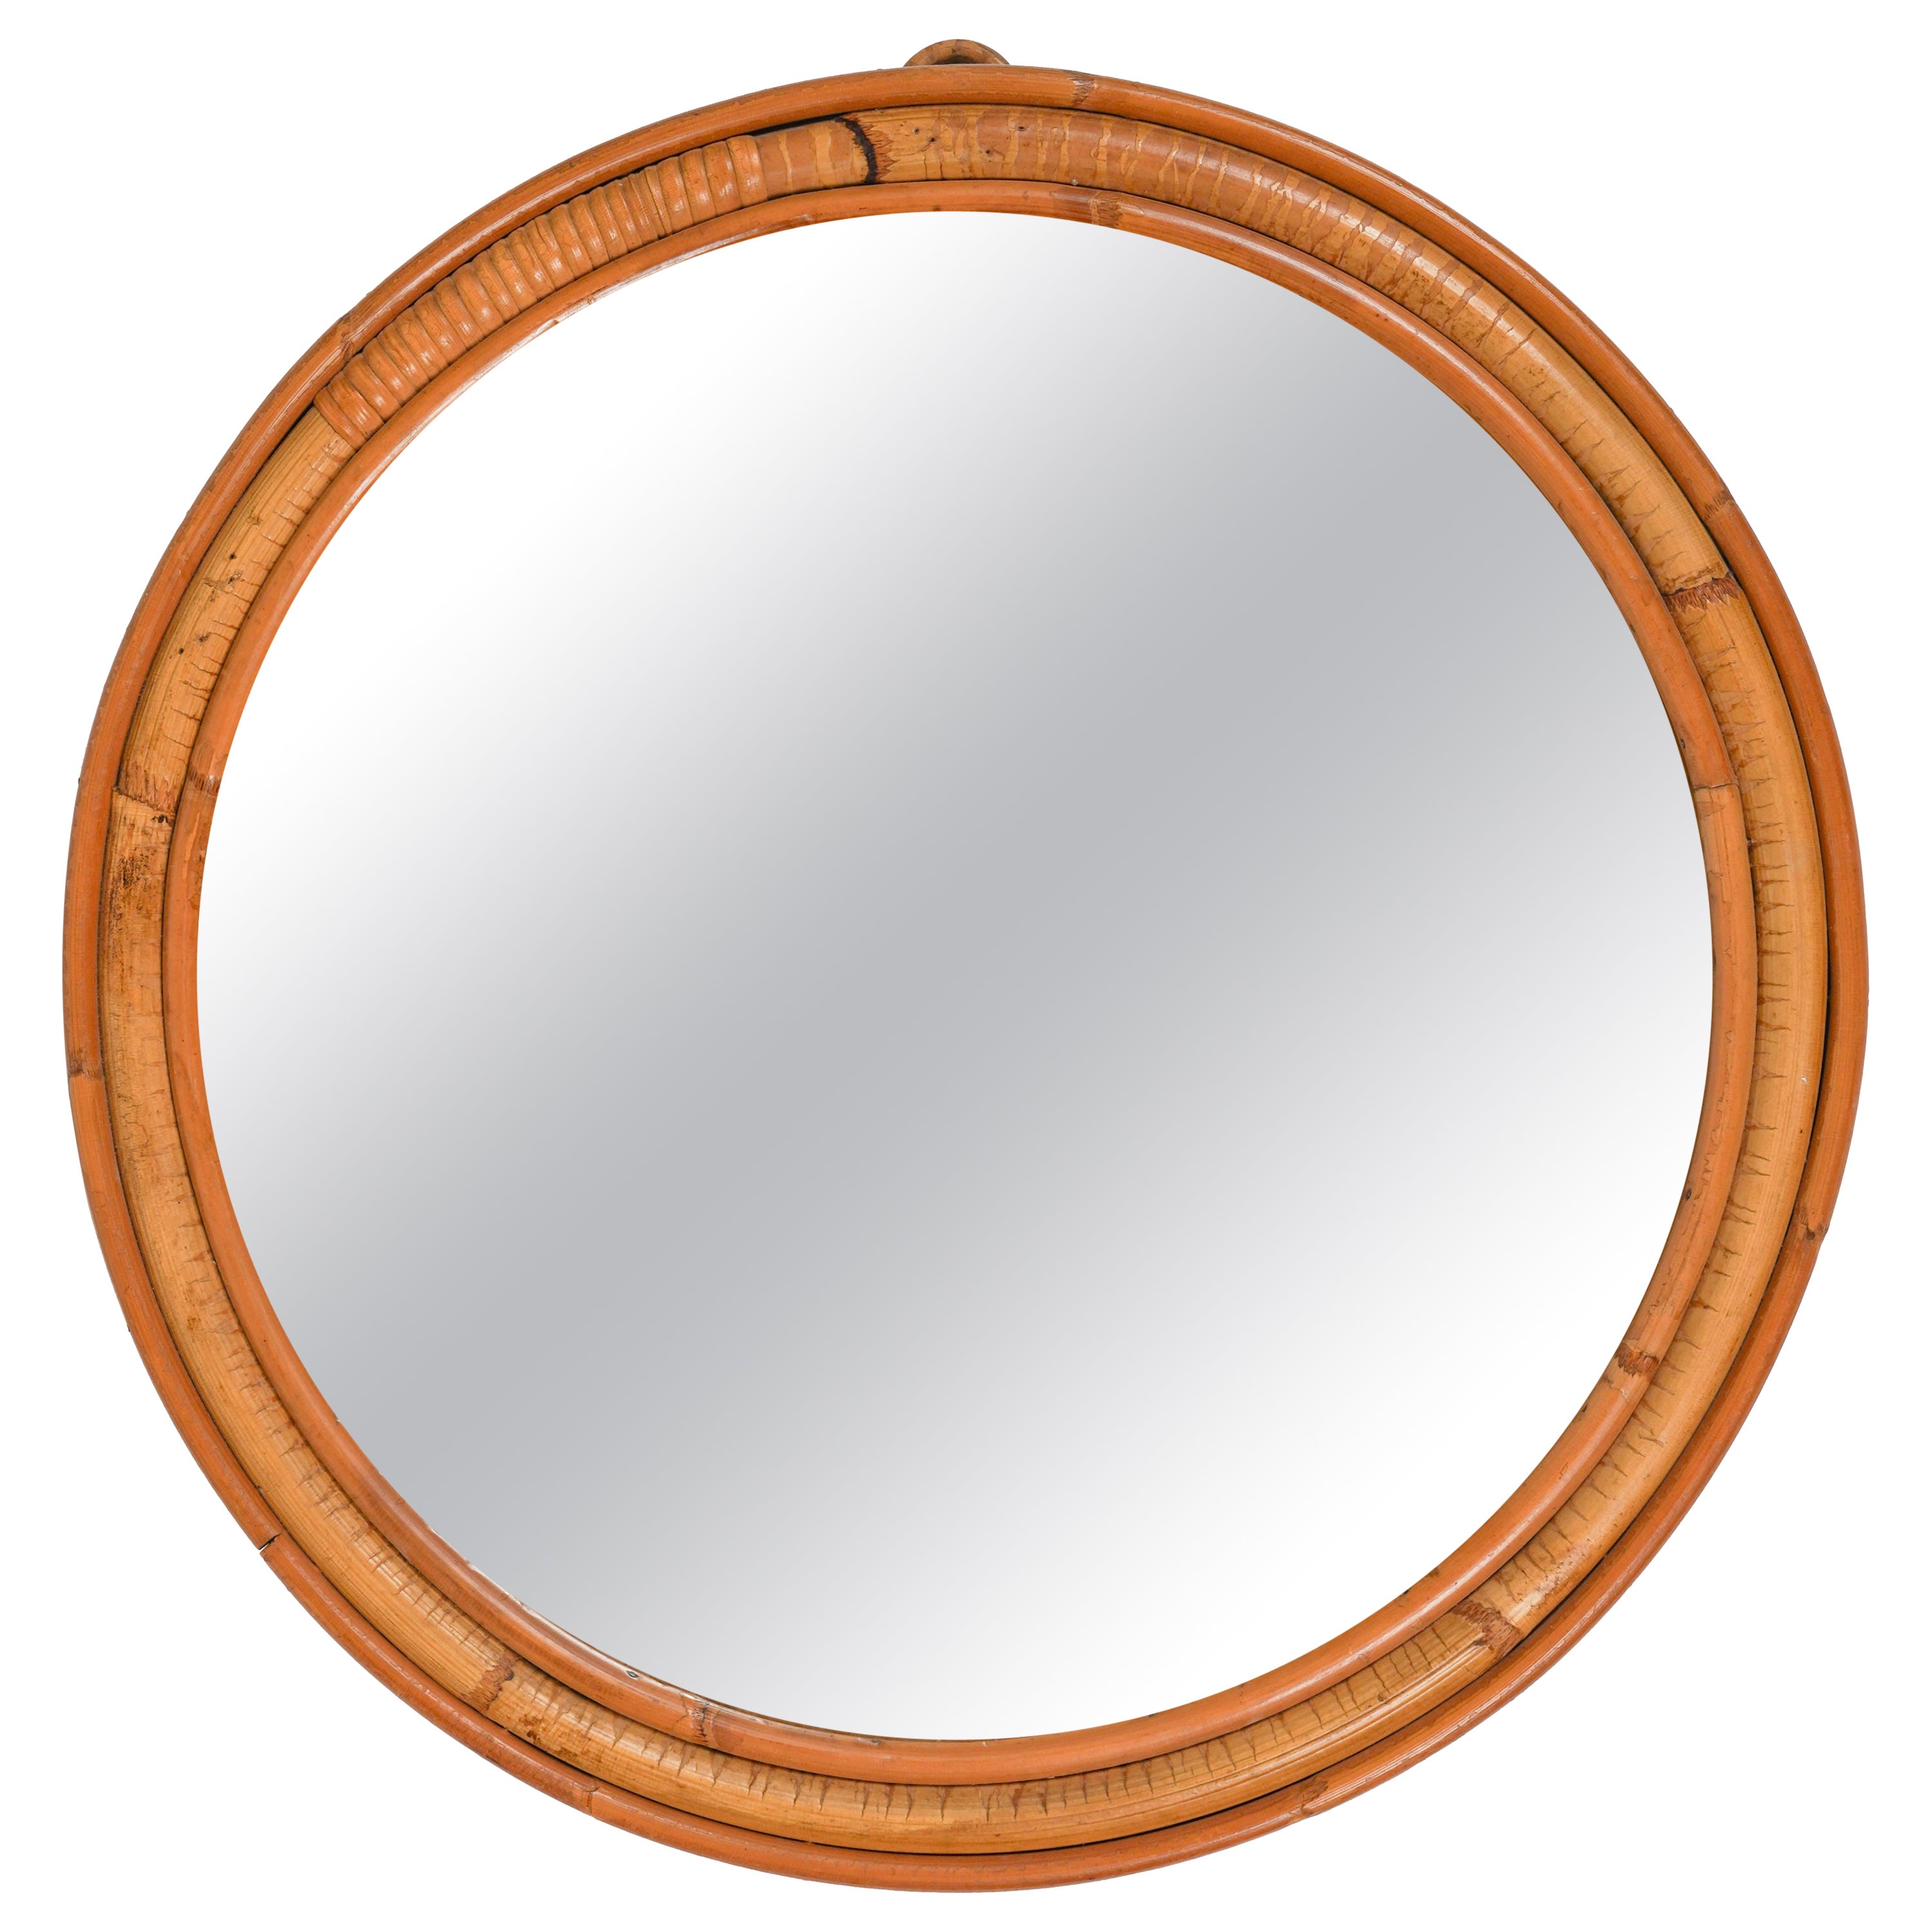 Midcentury Rattan and Bamboo Round Wall Mirror, Italy 1960s For Sale